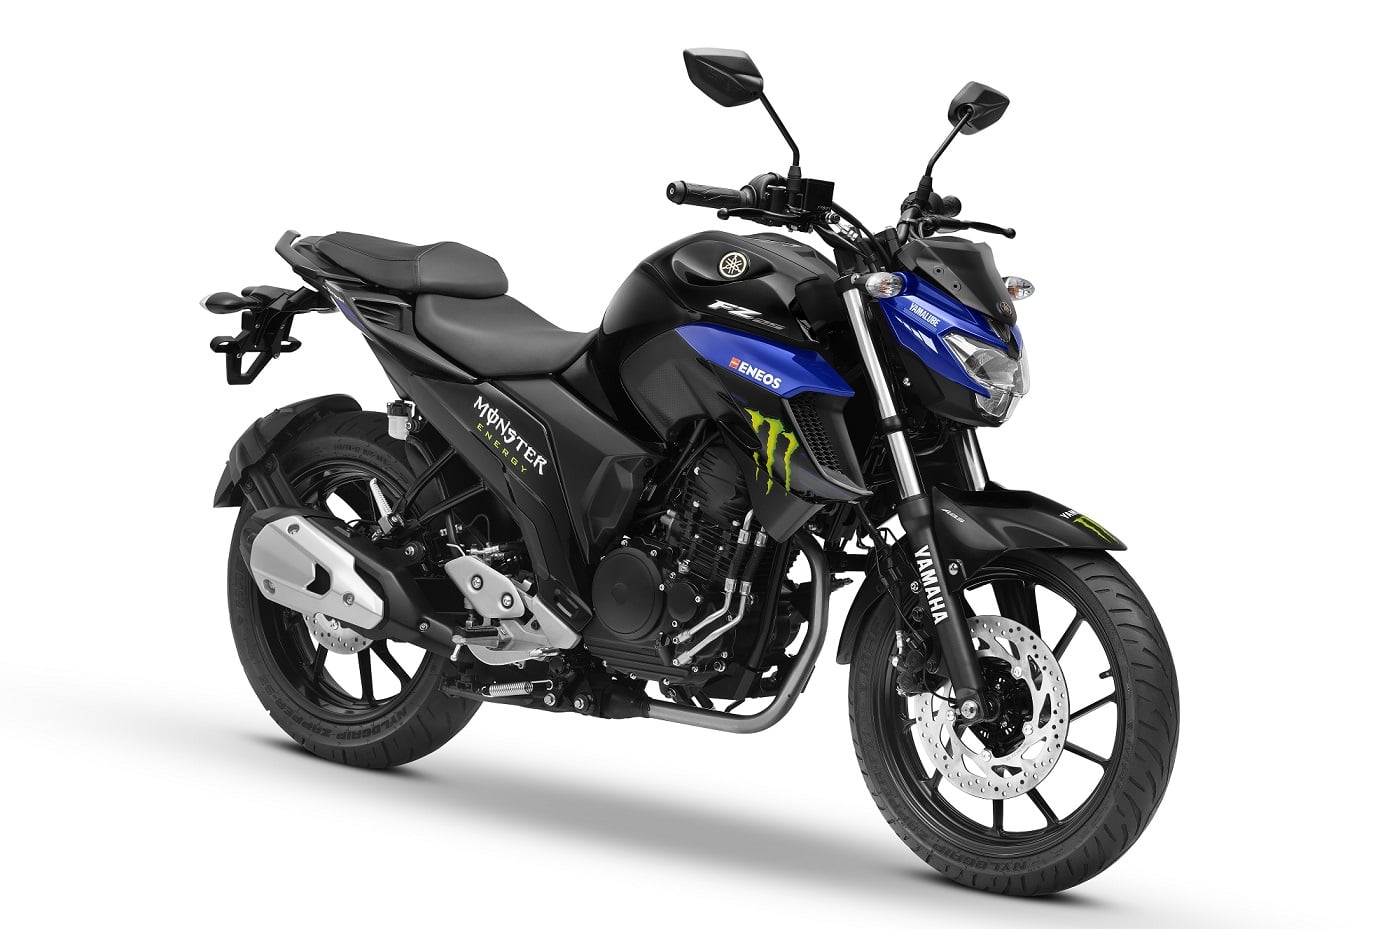 Yamaha Planning For A 250cc Adventure Motorcycle Based On Fz25